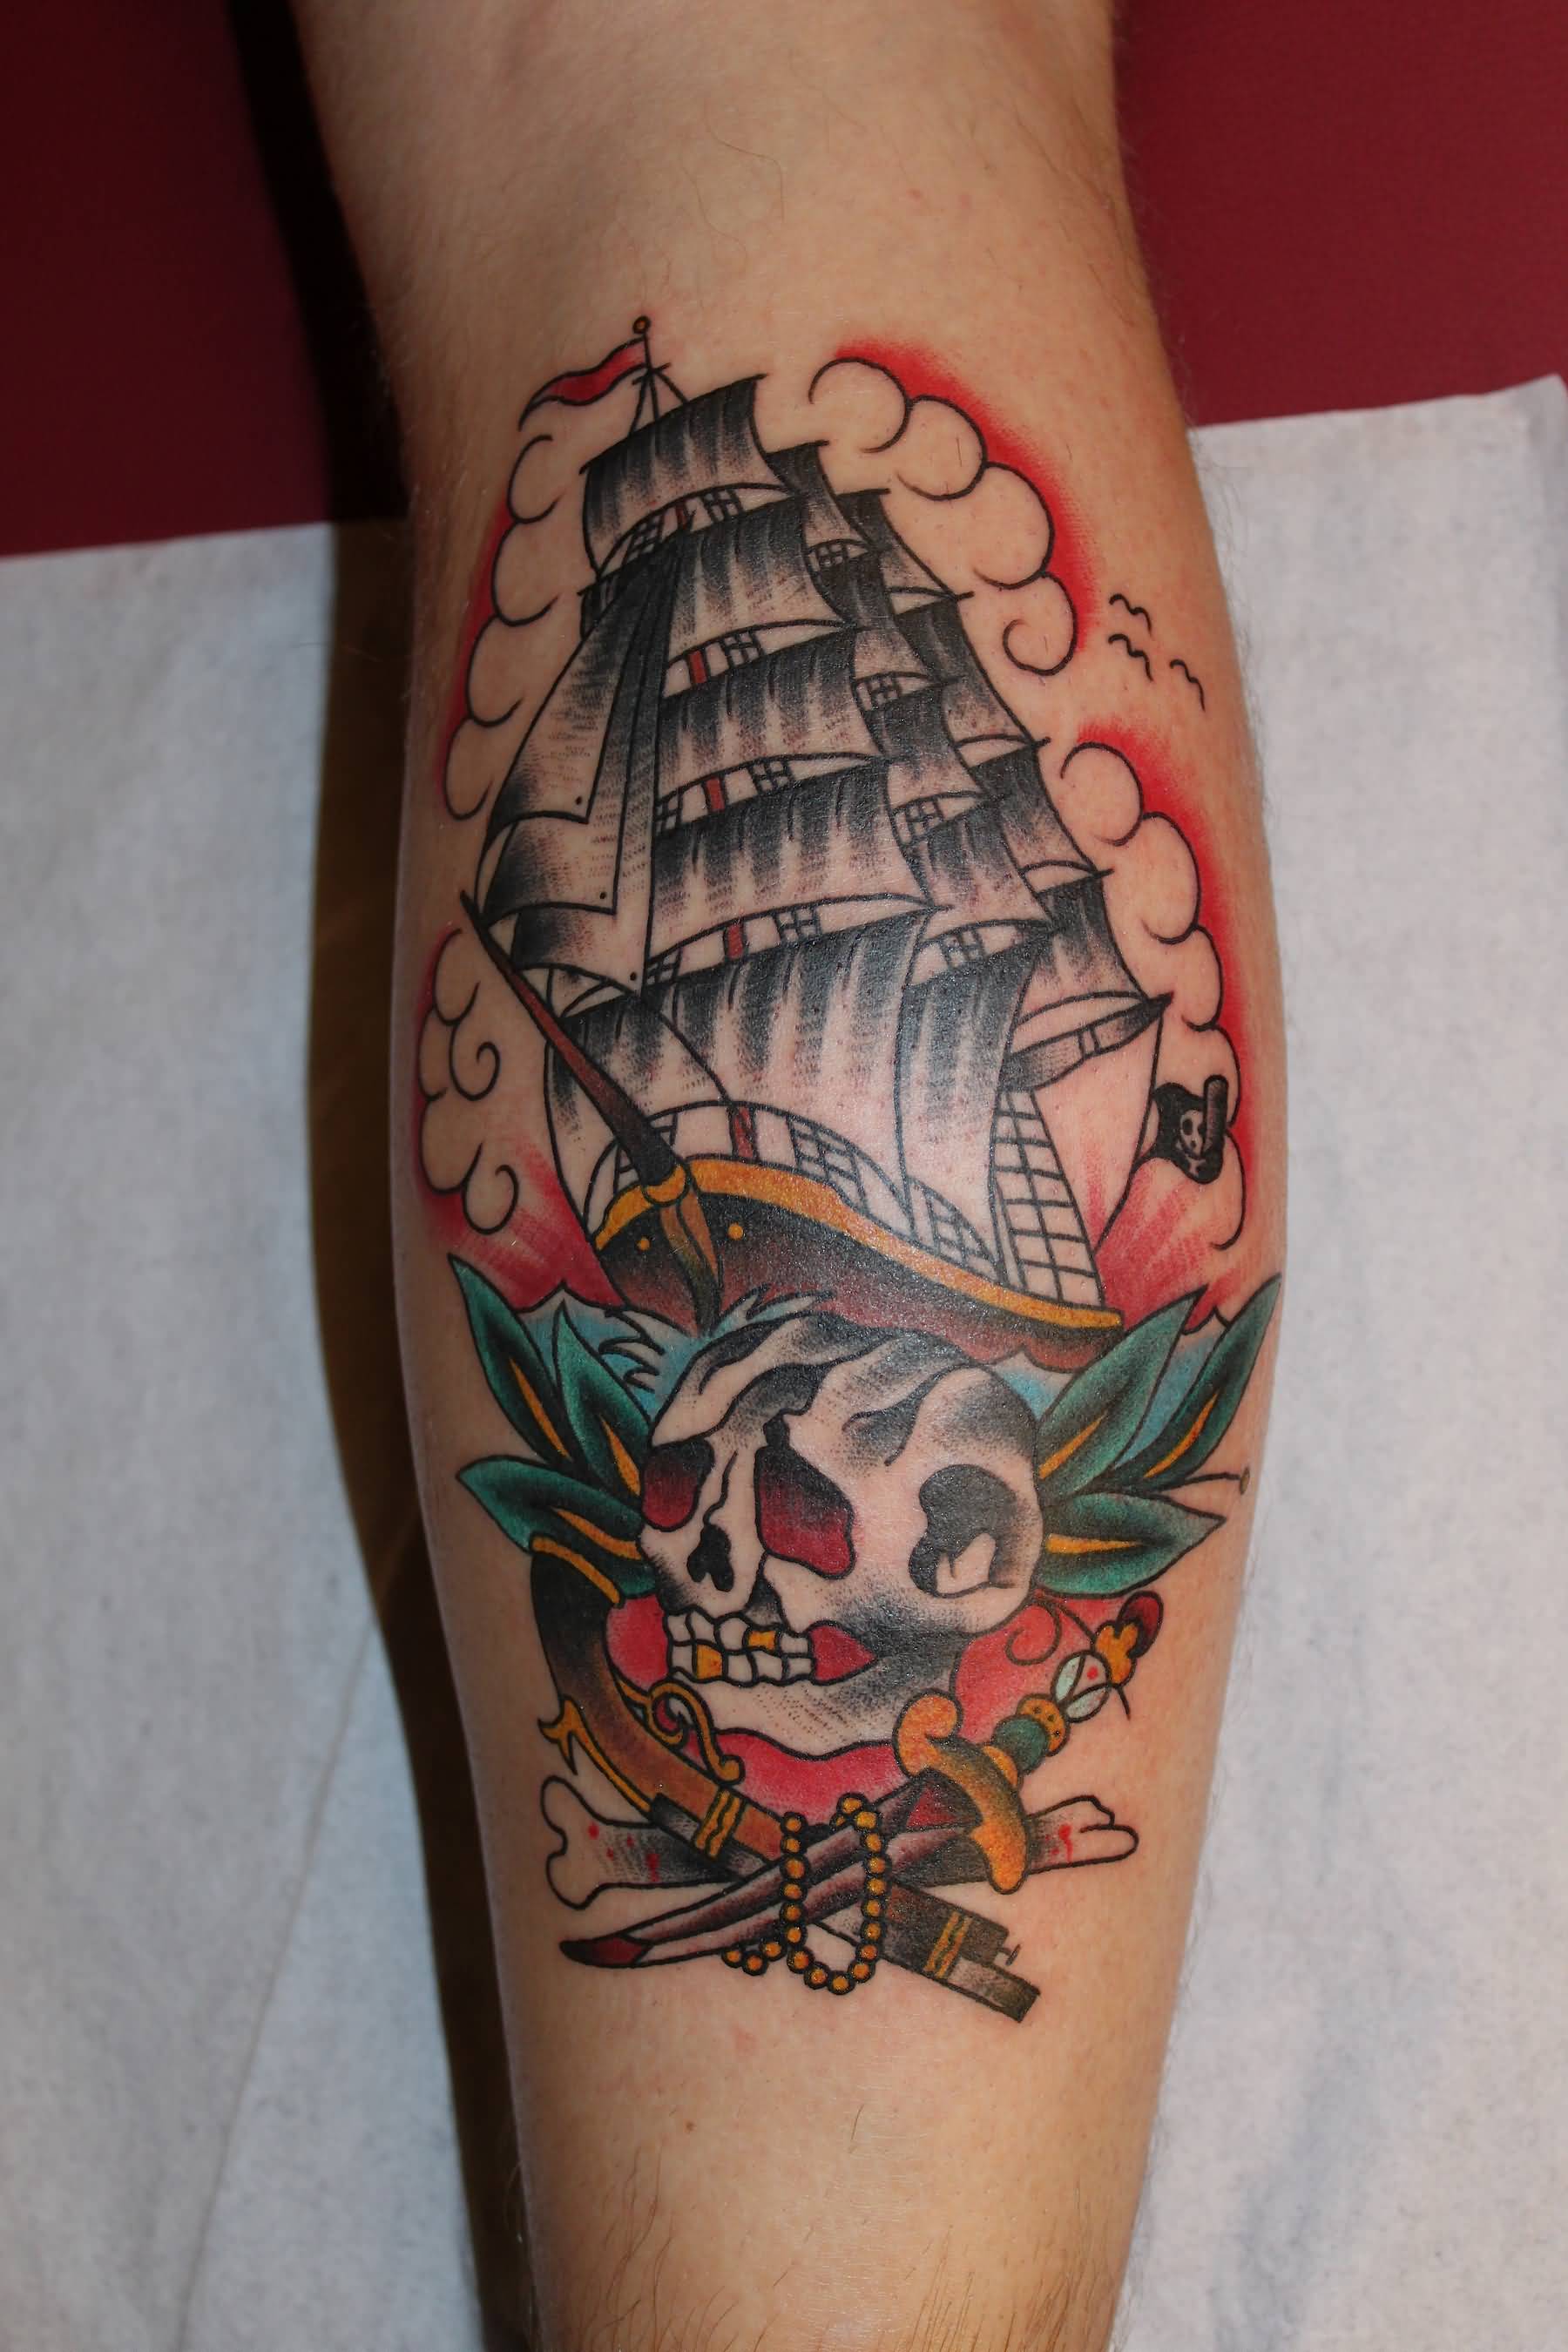 Traditional Pirate Ship With Skull Tattoo Design For Leg Calf